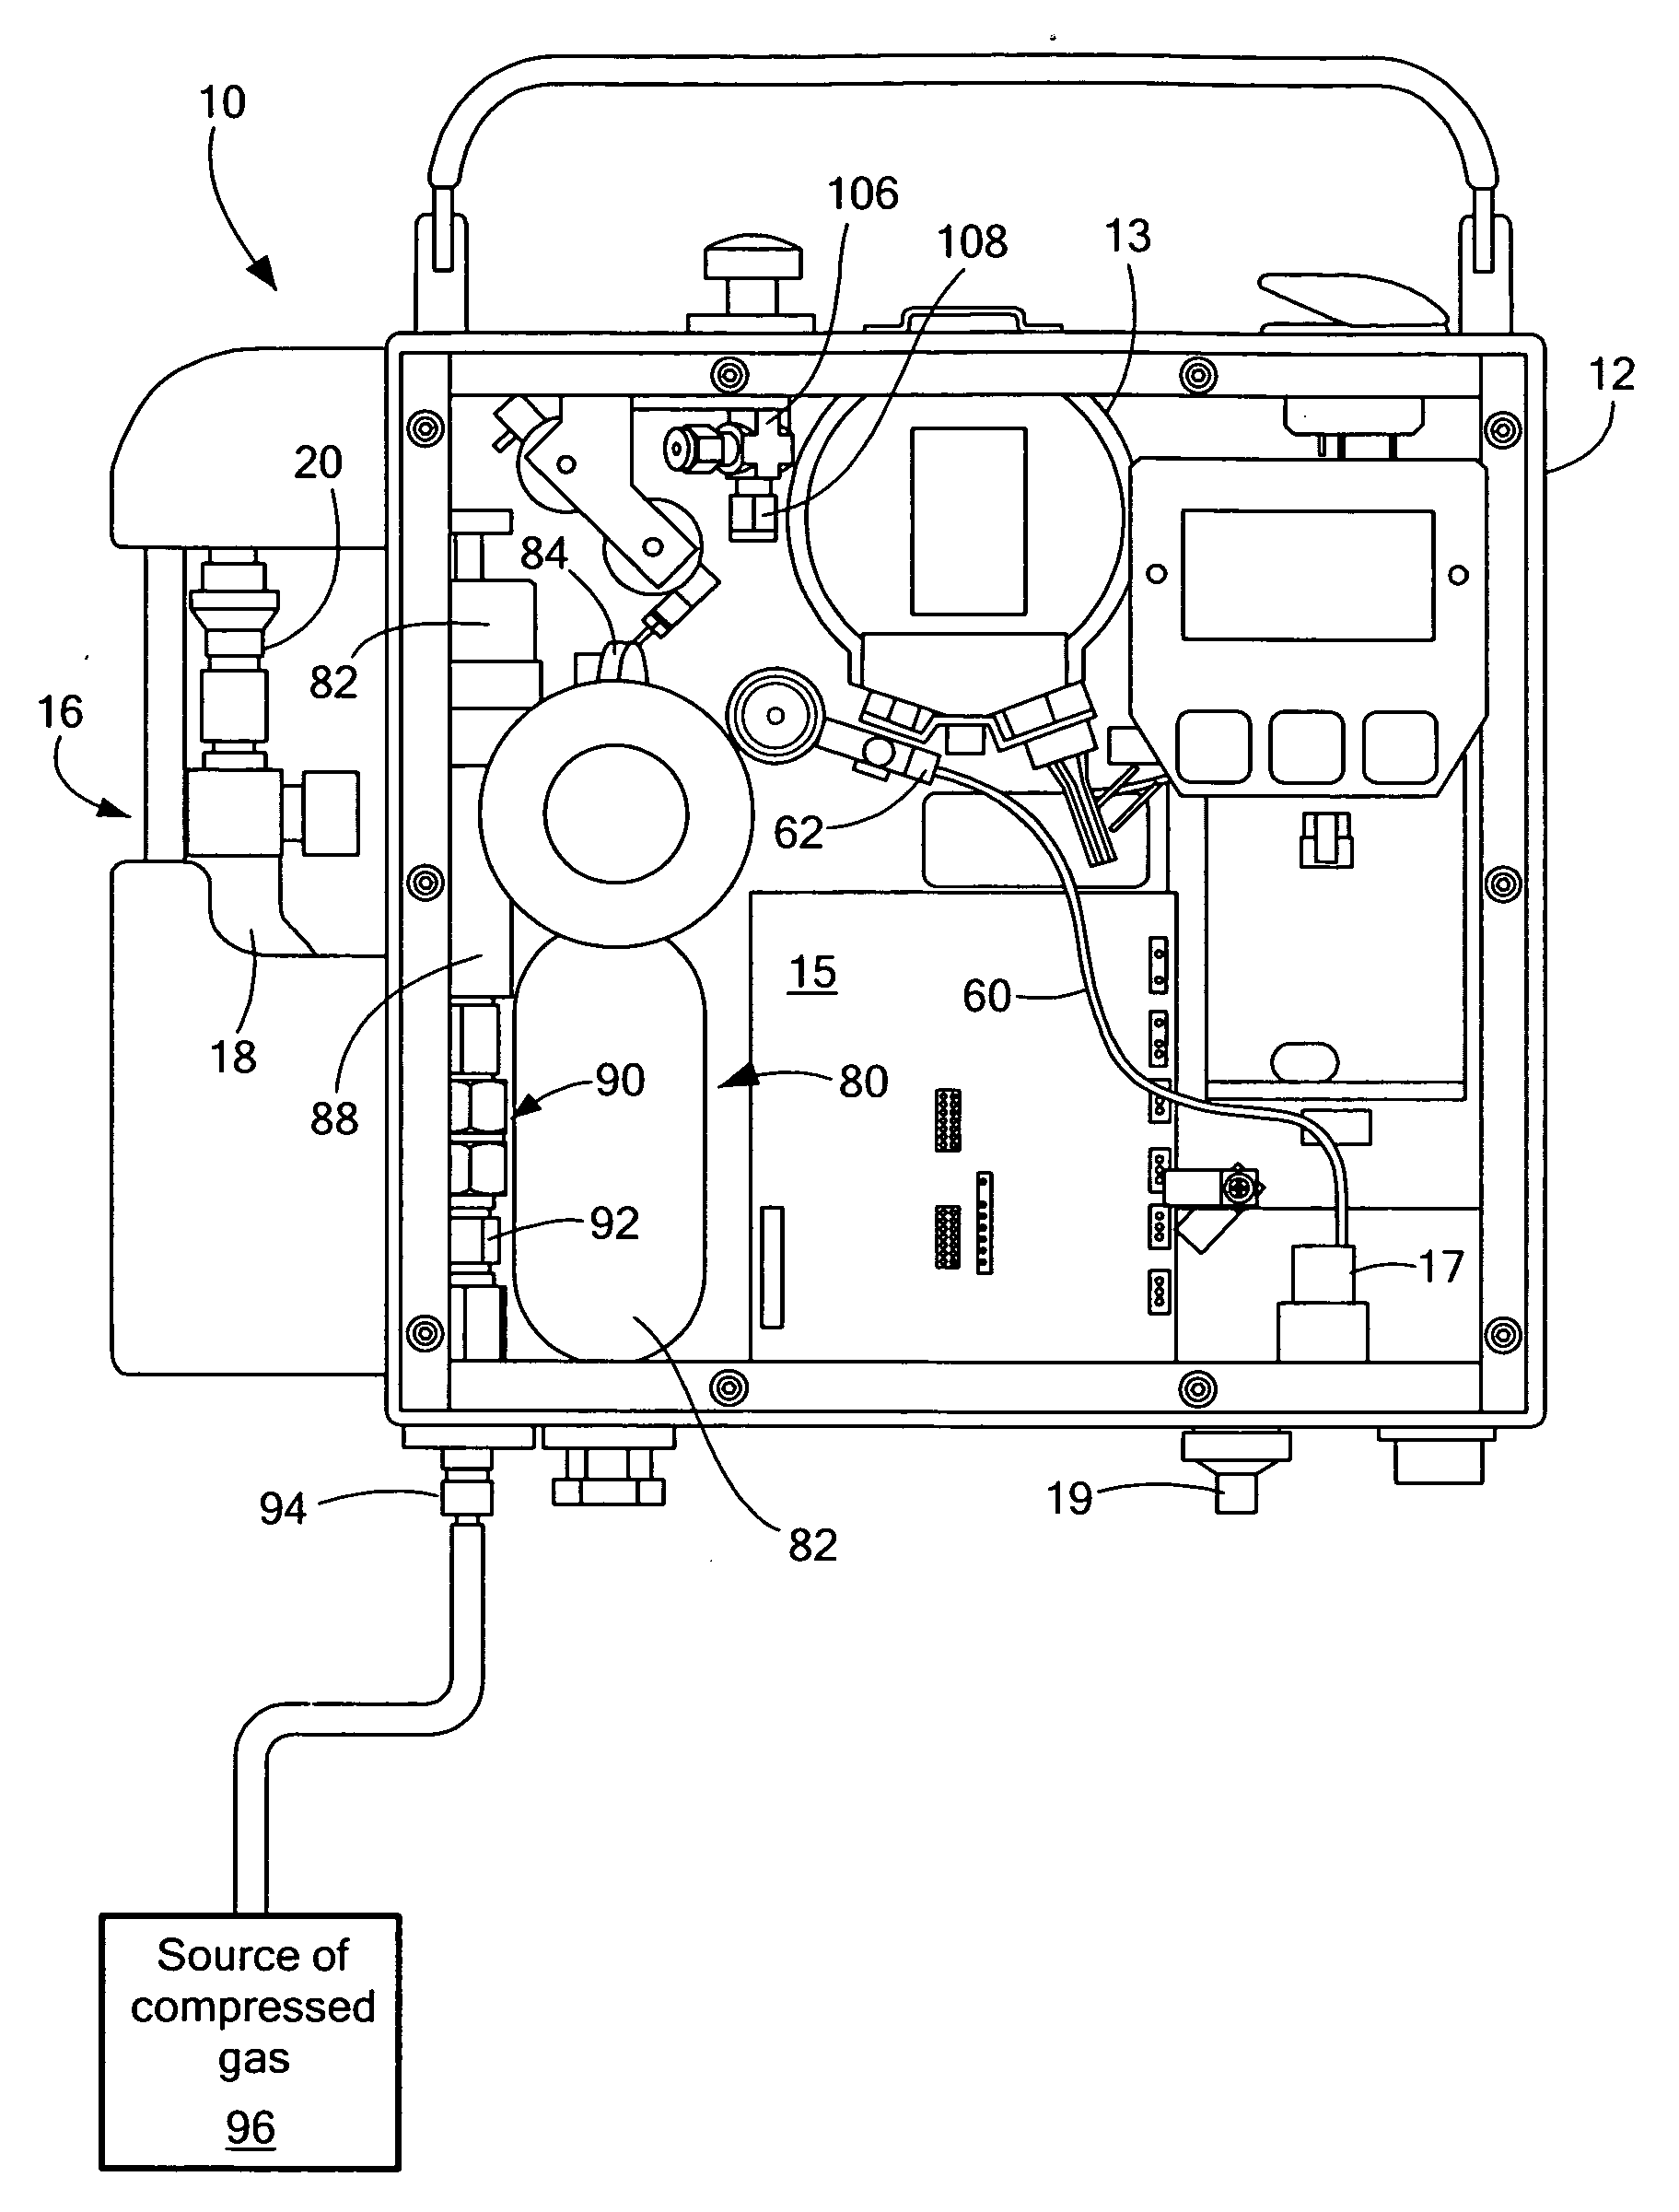 Supplemental air system for a portable, instrinsically safe, flame ionization detector (FID) device